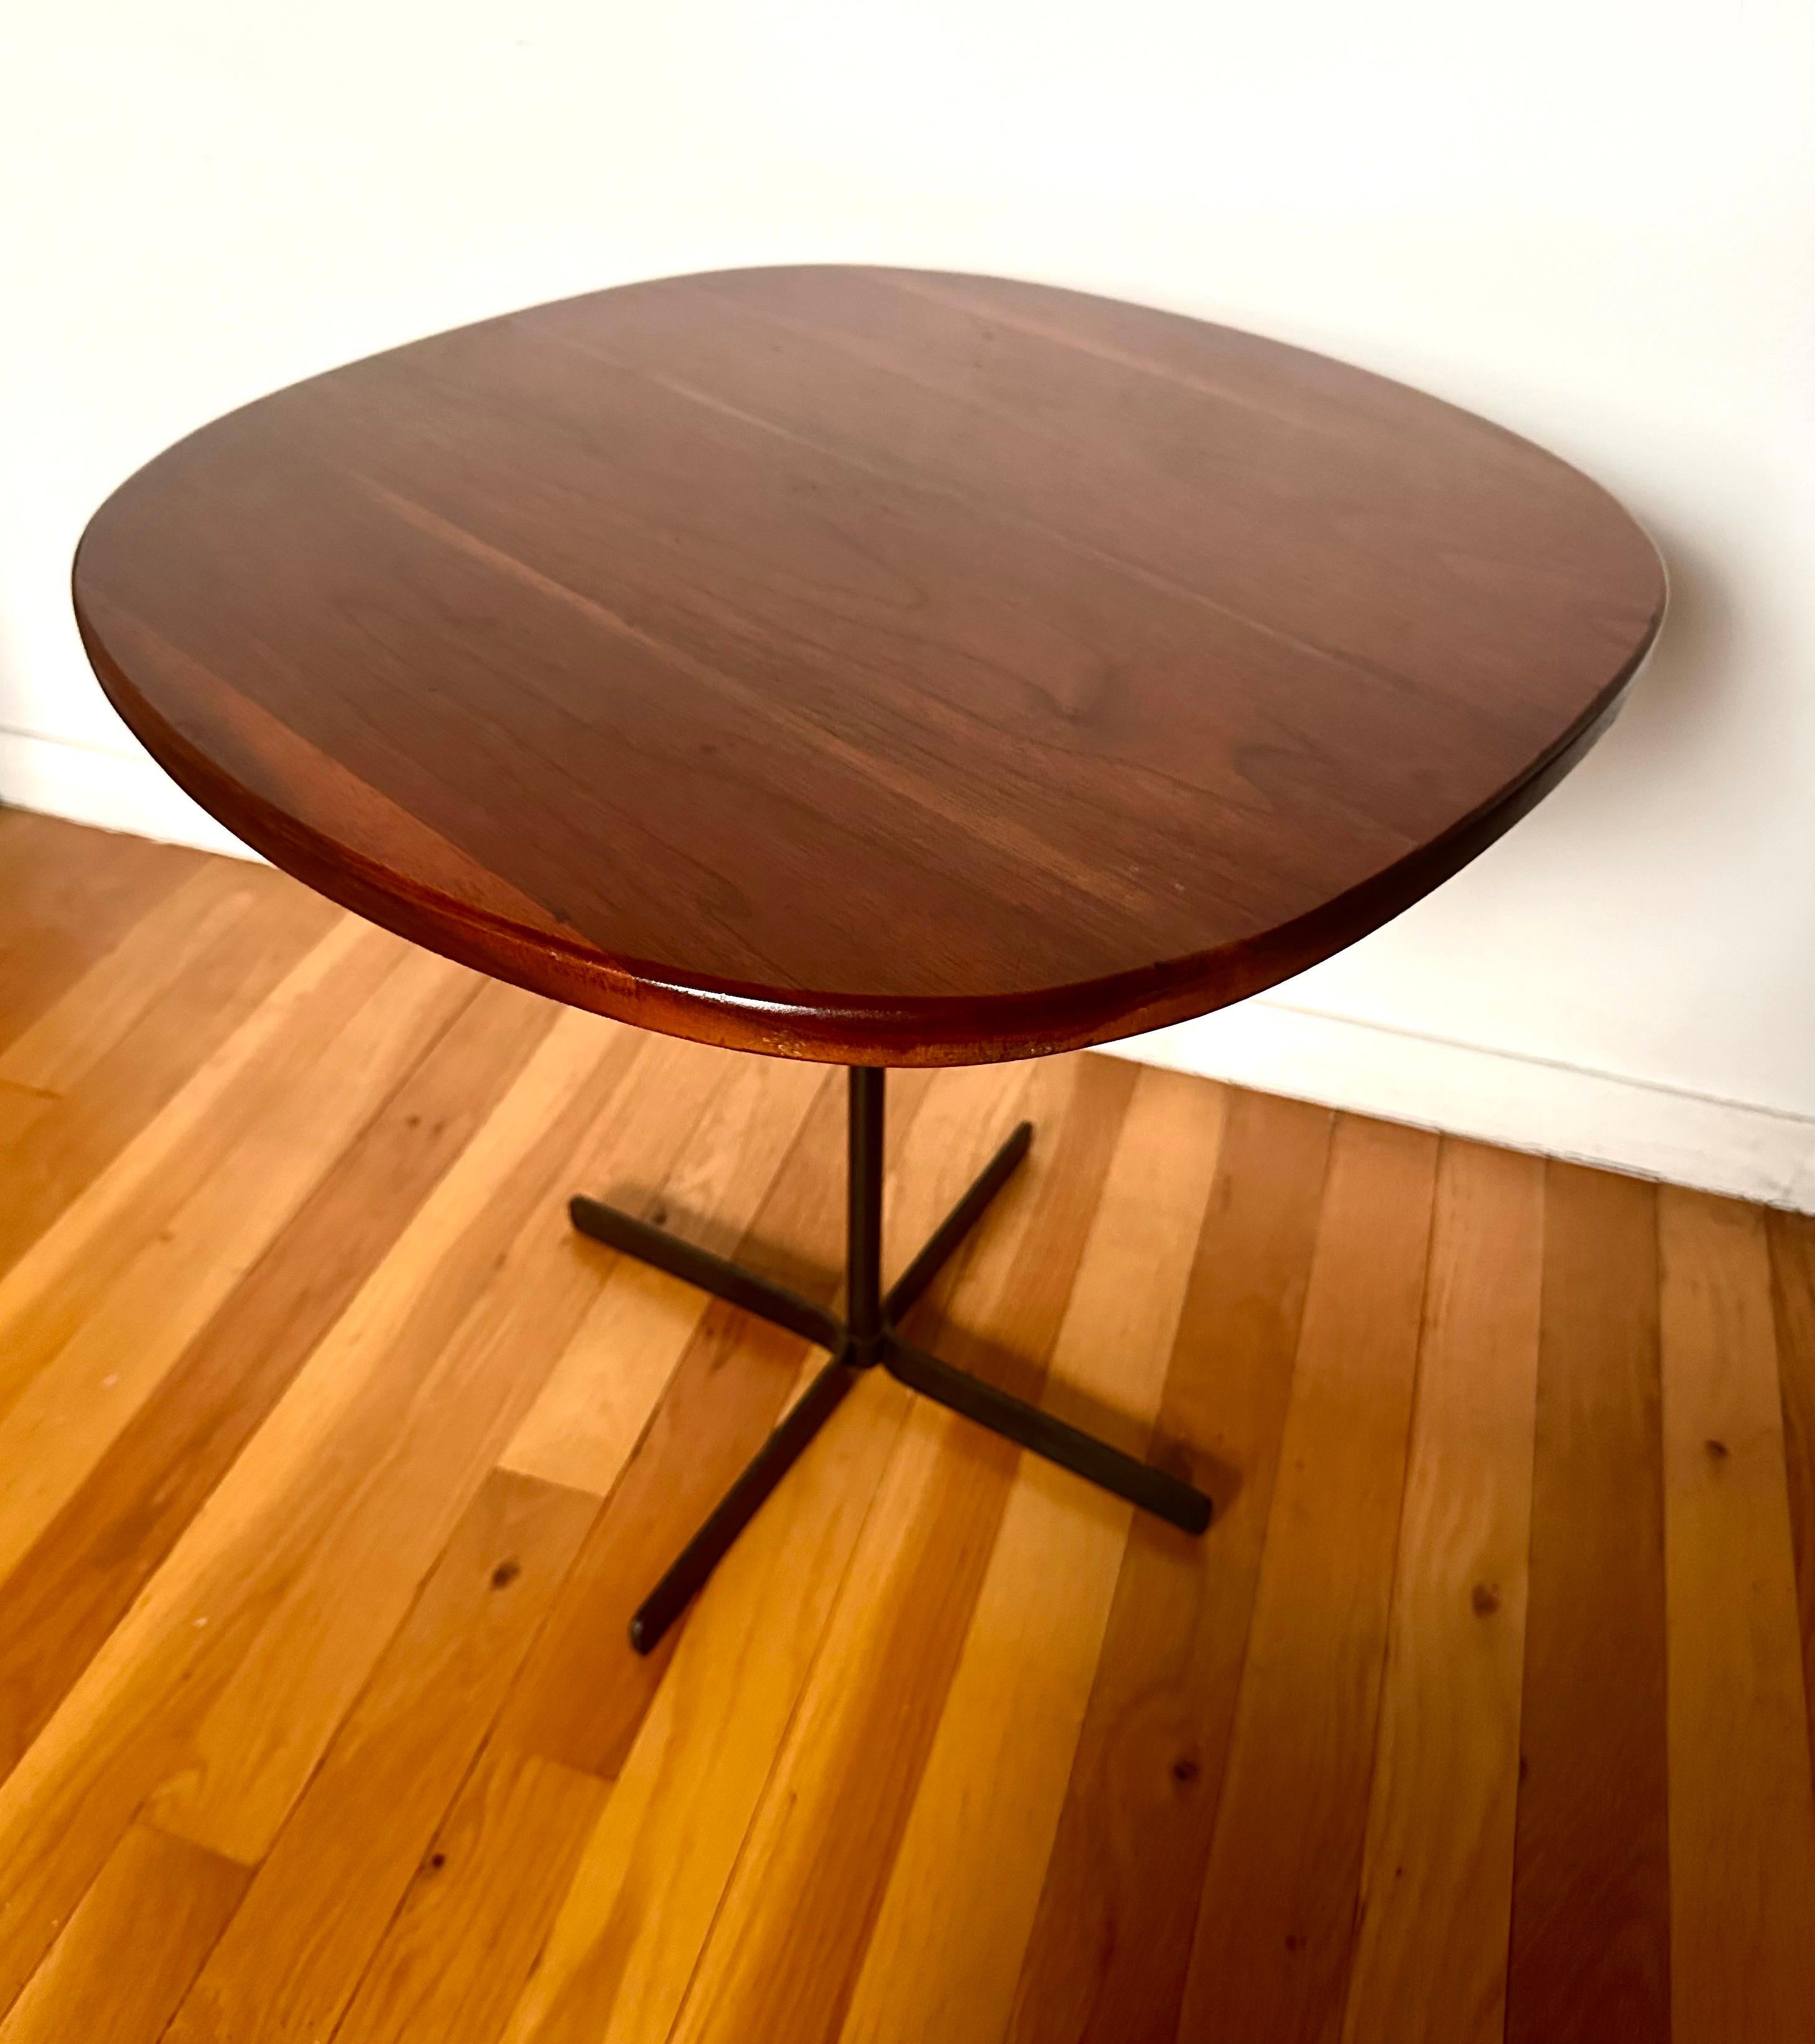 Simple and practical design that effectively conveys the California Craft sensibility through proportion and material.  The rounded square figured-walnut top floats on the slender support over cross base.  Produced for Allan Gould Designs.